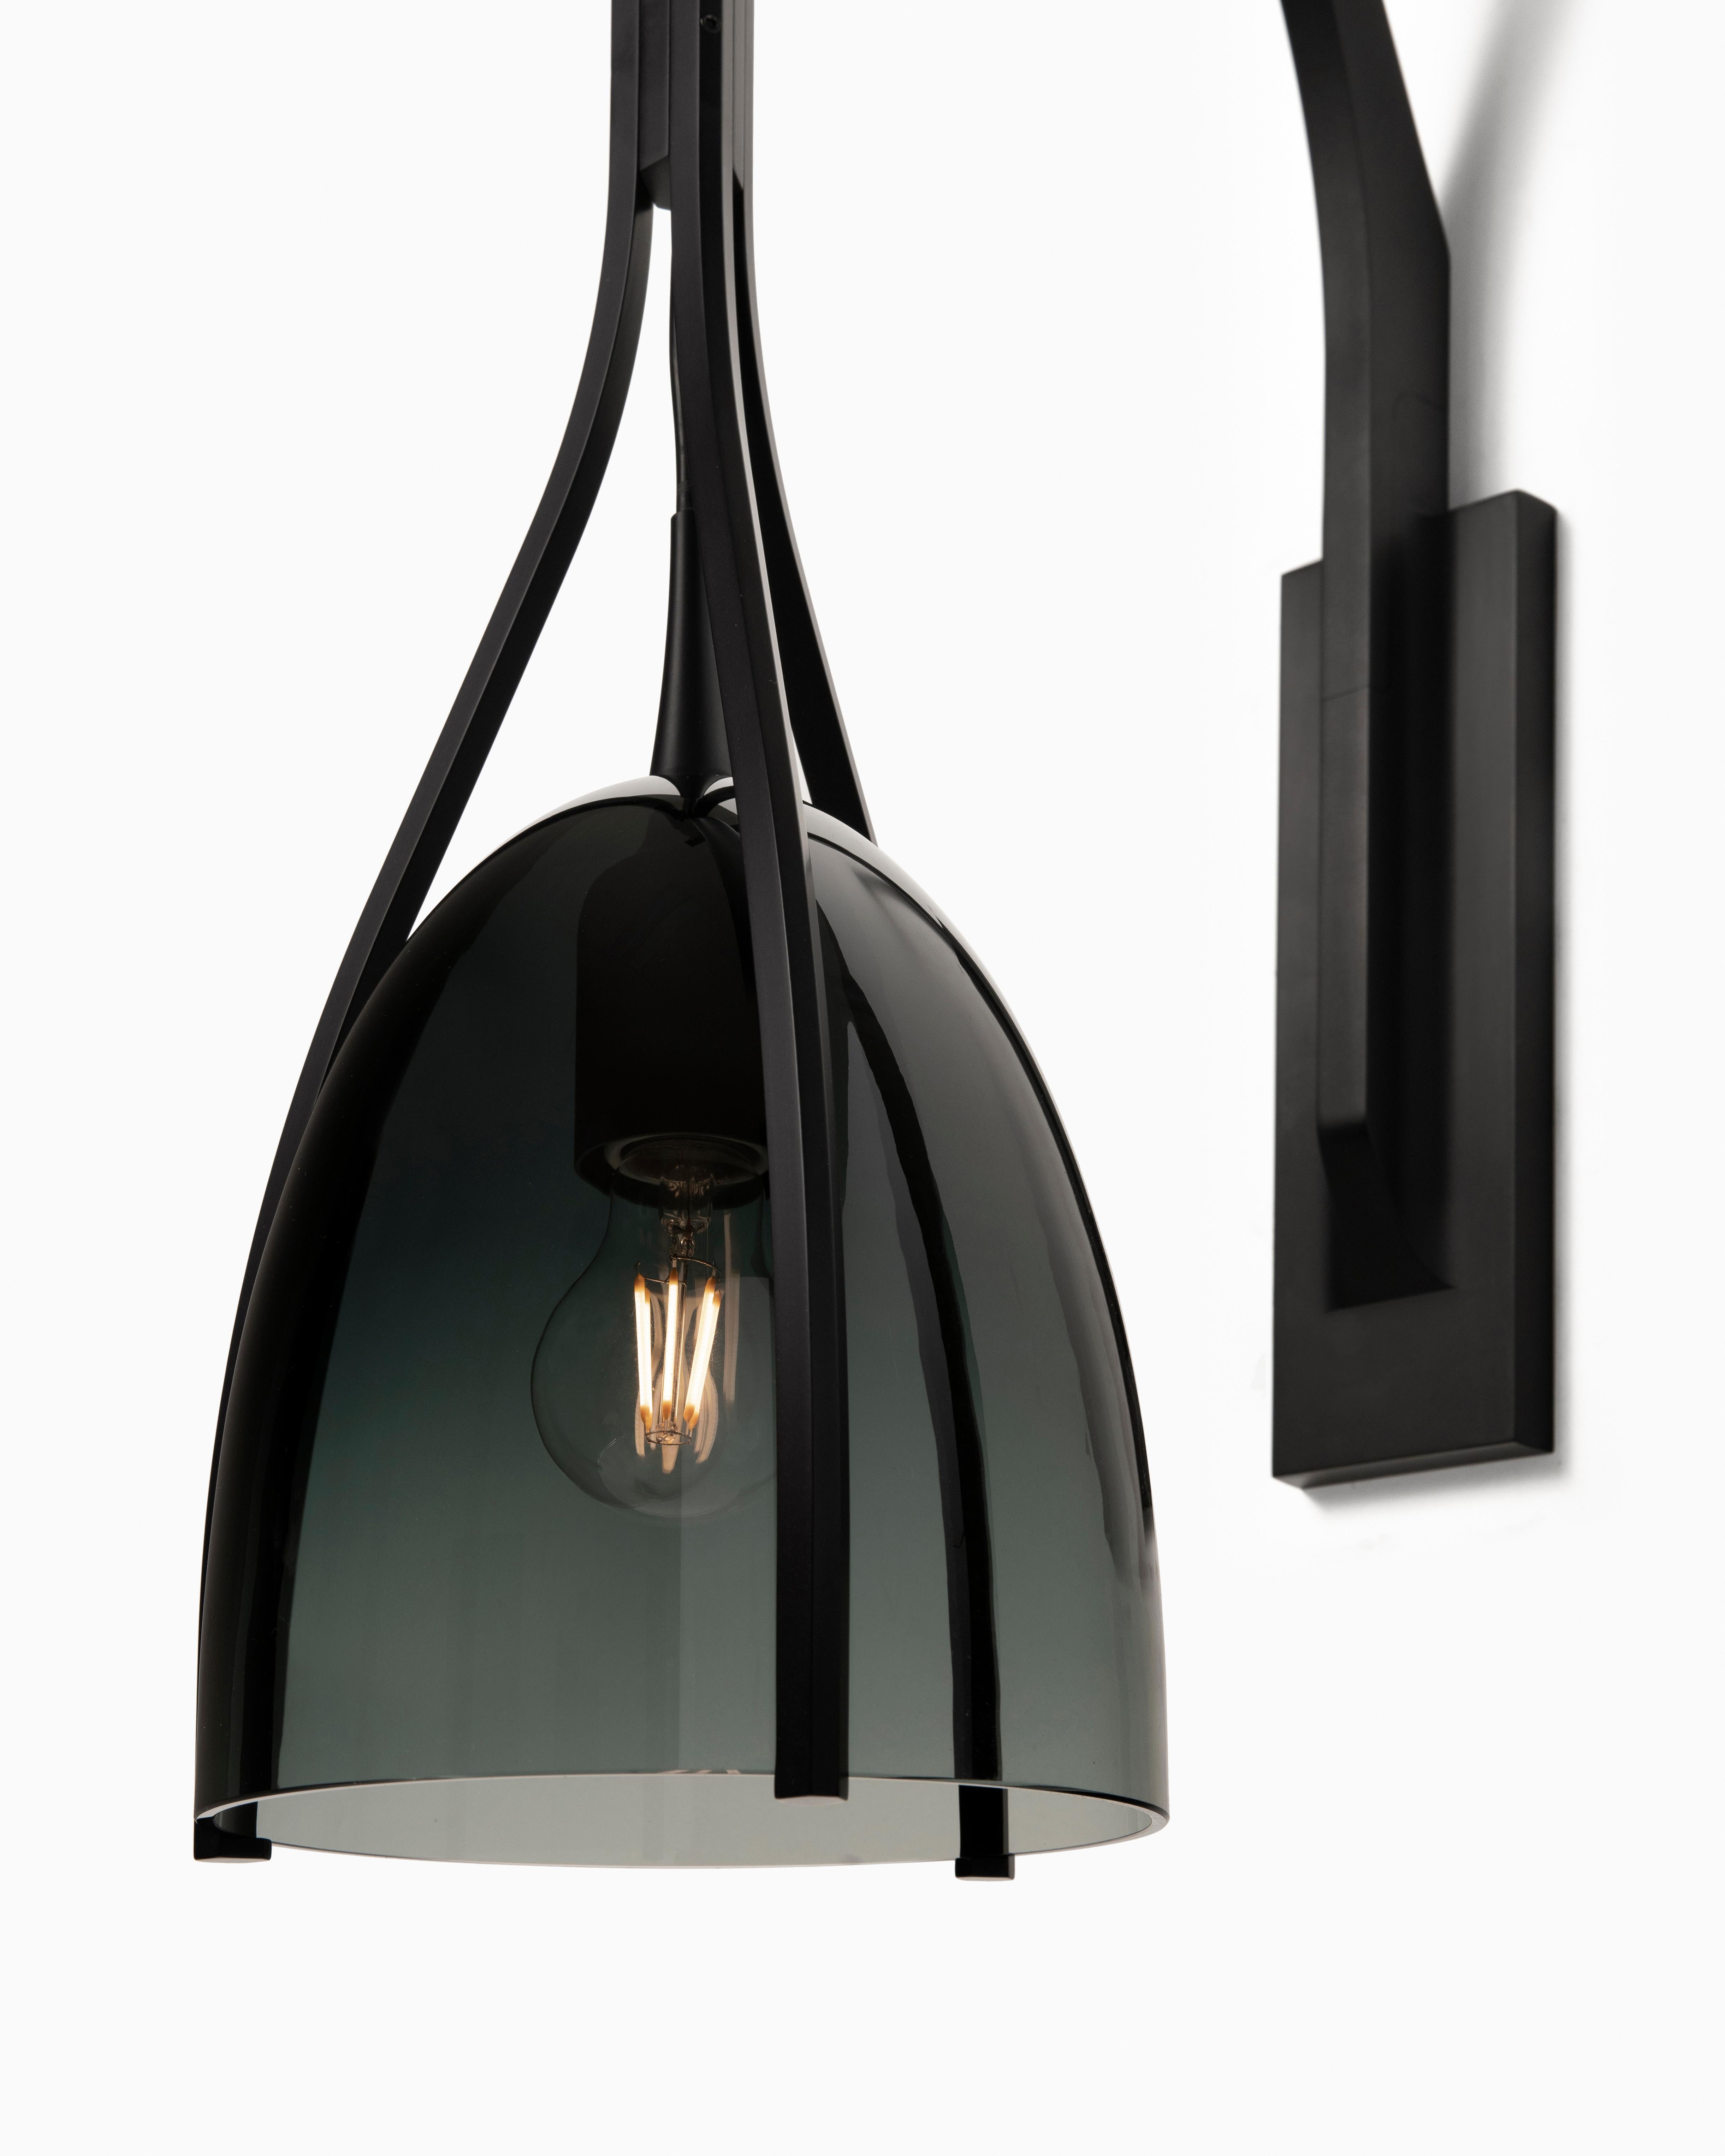 Inspired by the innate sleekness and sophistication heralded by felines, the HOLLY HUNT Black Cat sconce combines hand-blown artisanal glass with the latest precision manufacturing technology. The delicate shade is held suspended by thin, contoured